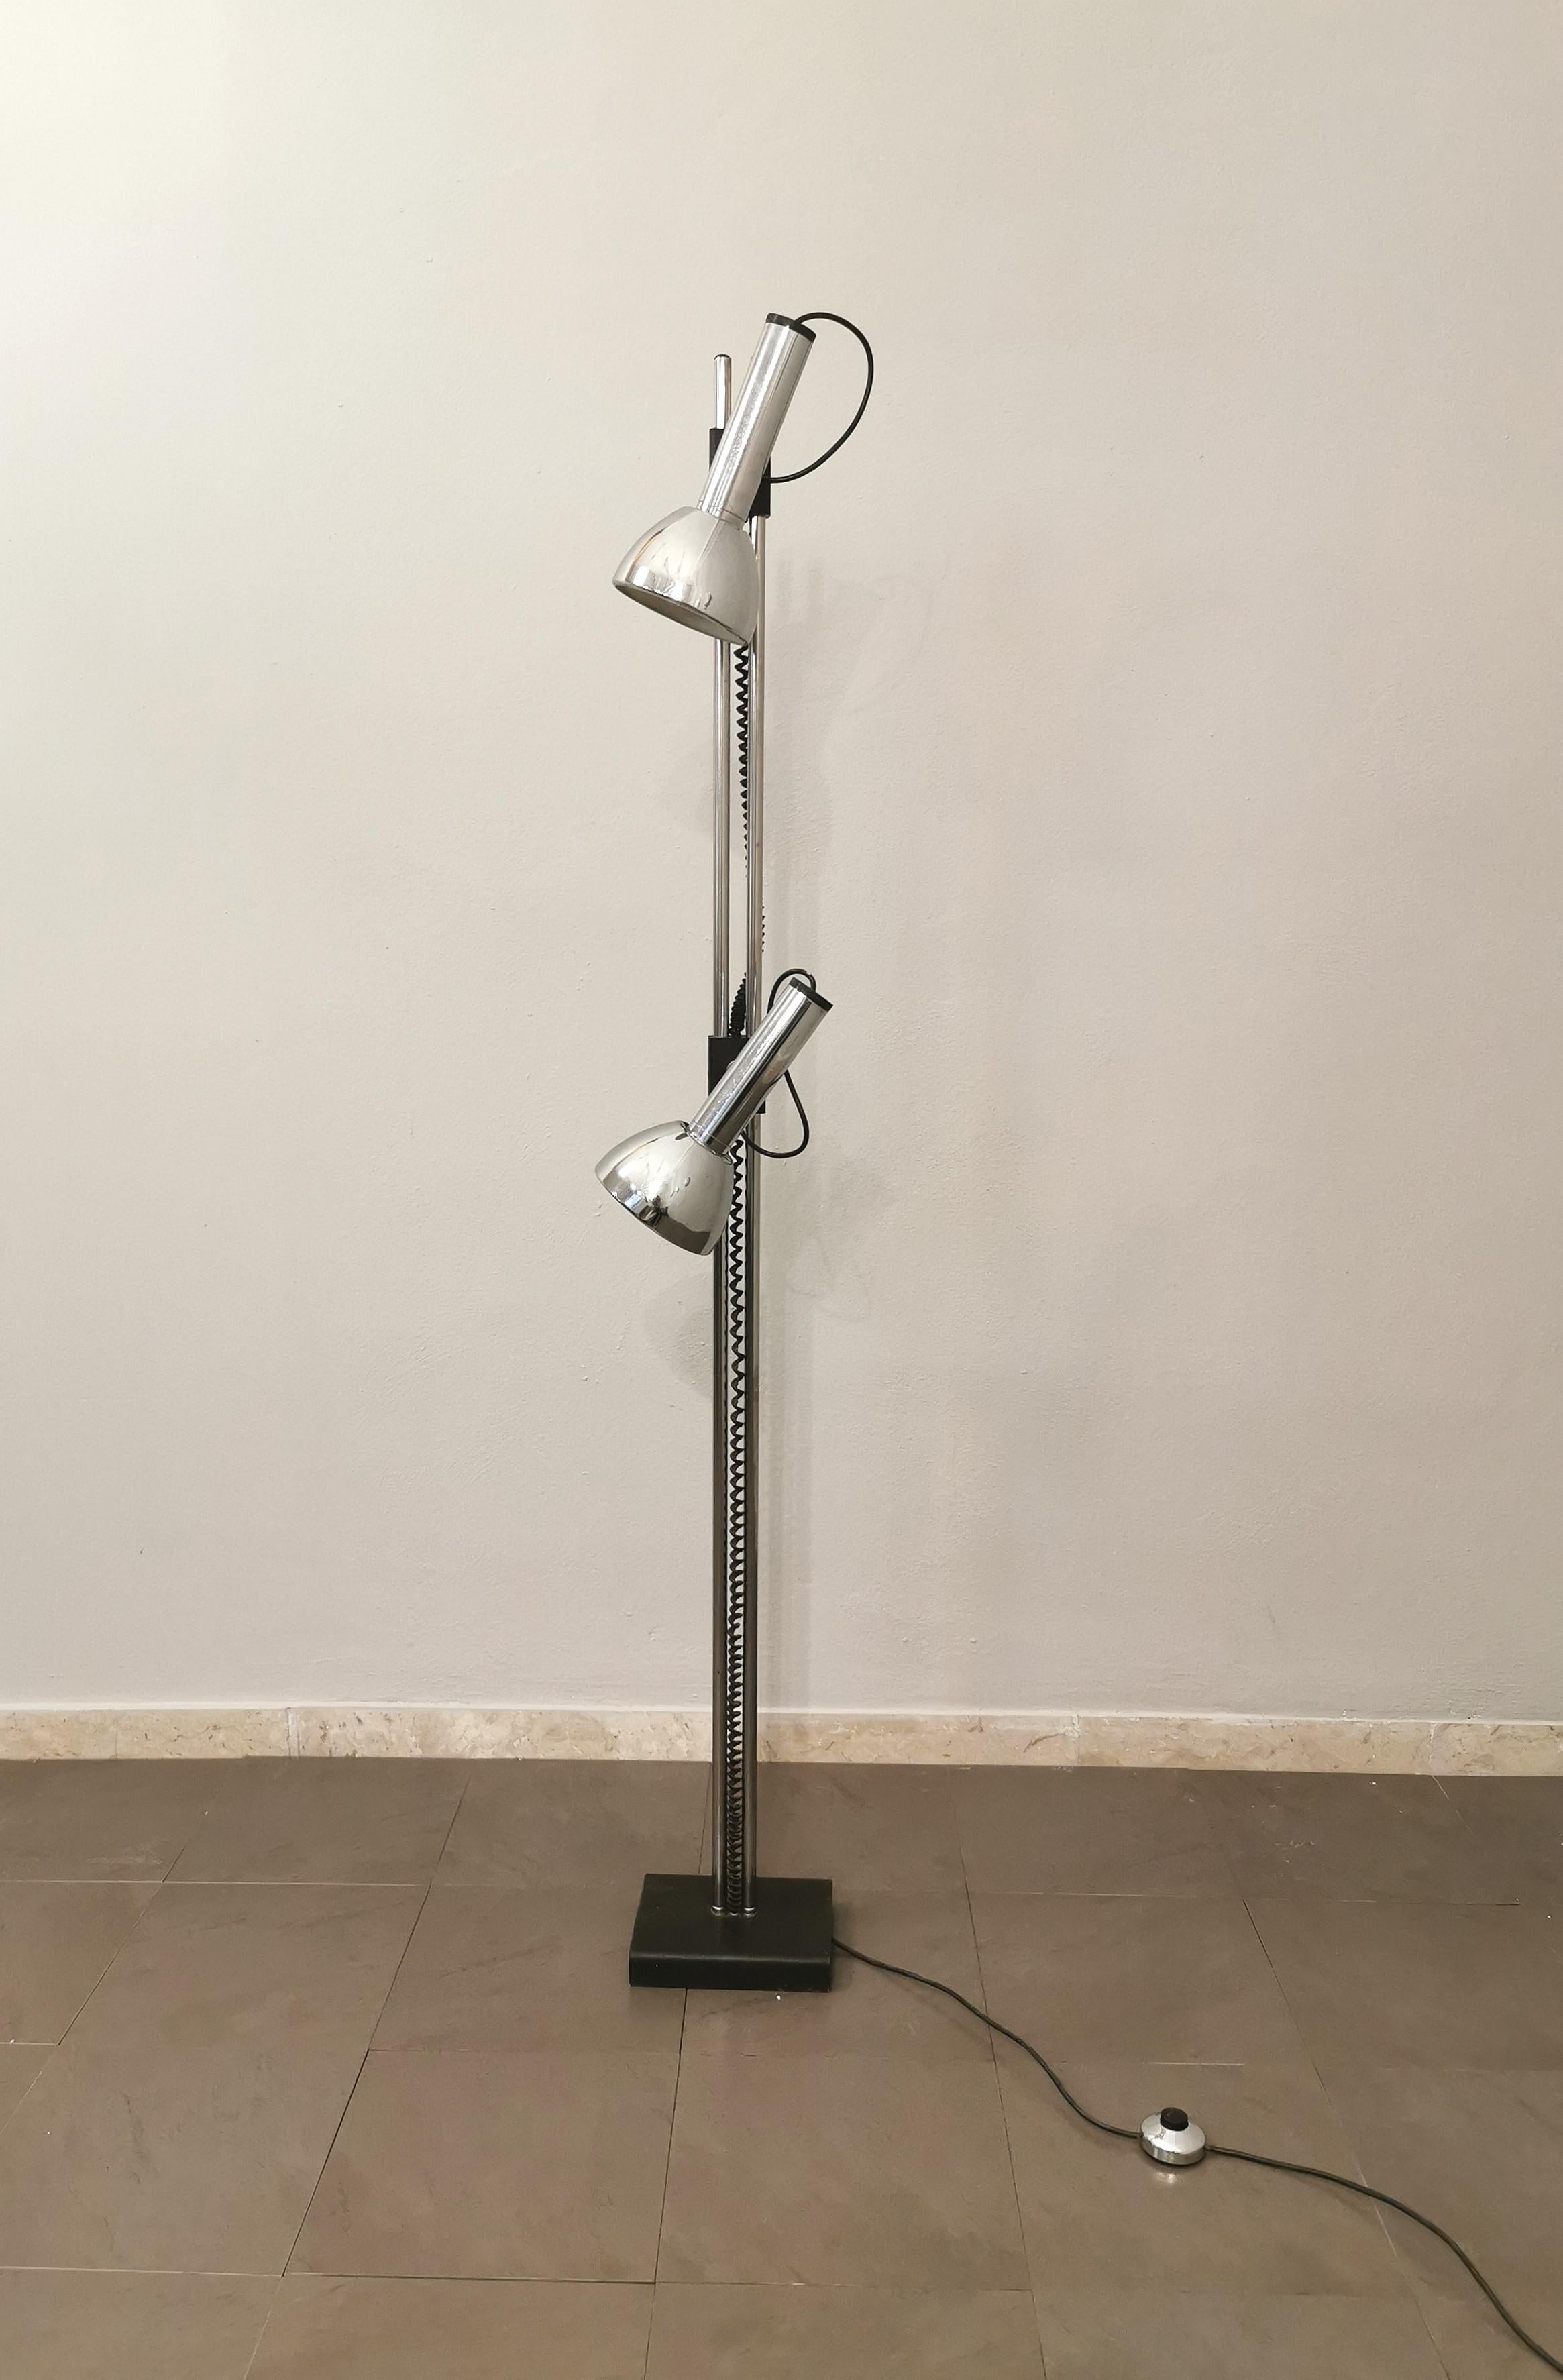 Multifunctional floor lamp produced by the Italian company 